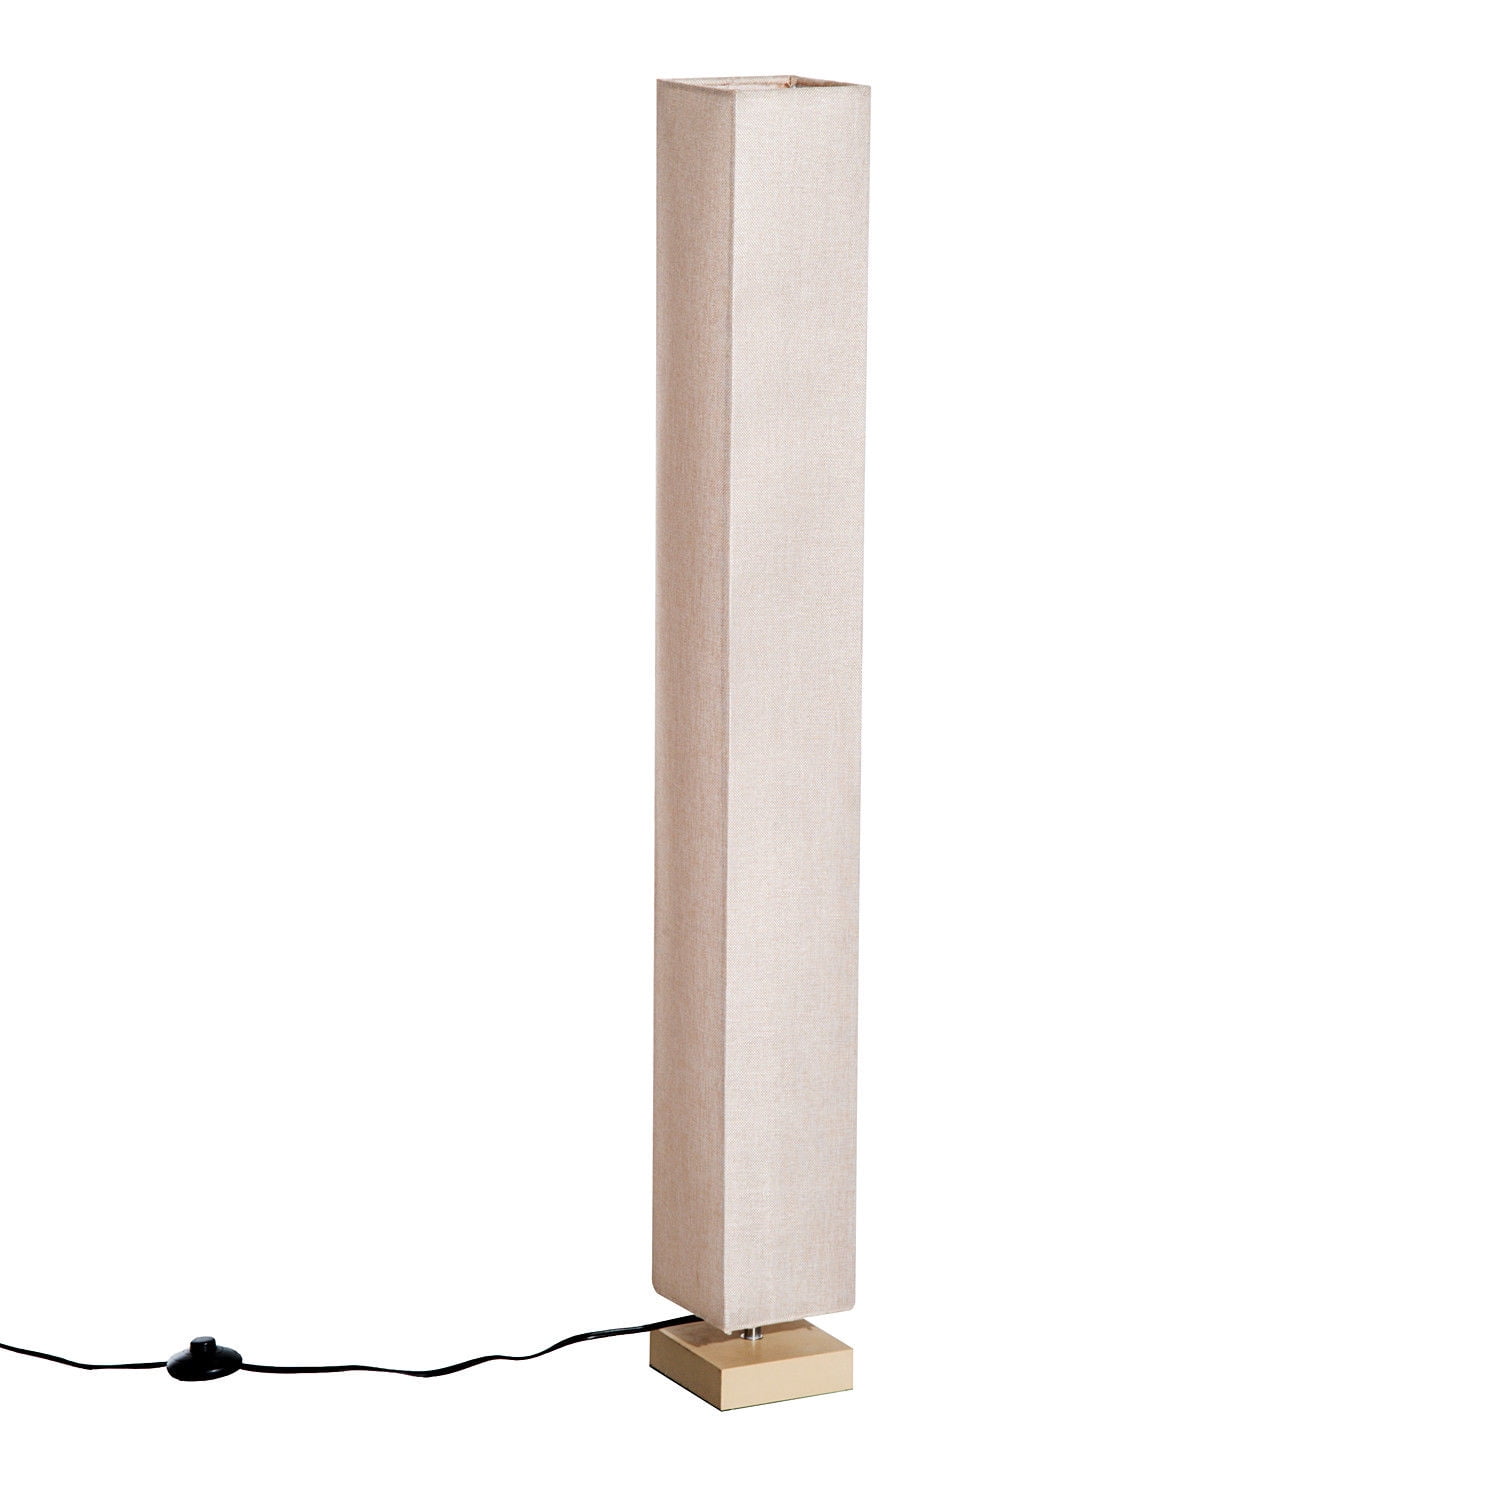 HOMCOM 47" Modern Square Linen Fabric Shade Floor Lamp with Wooden Base